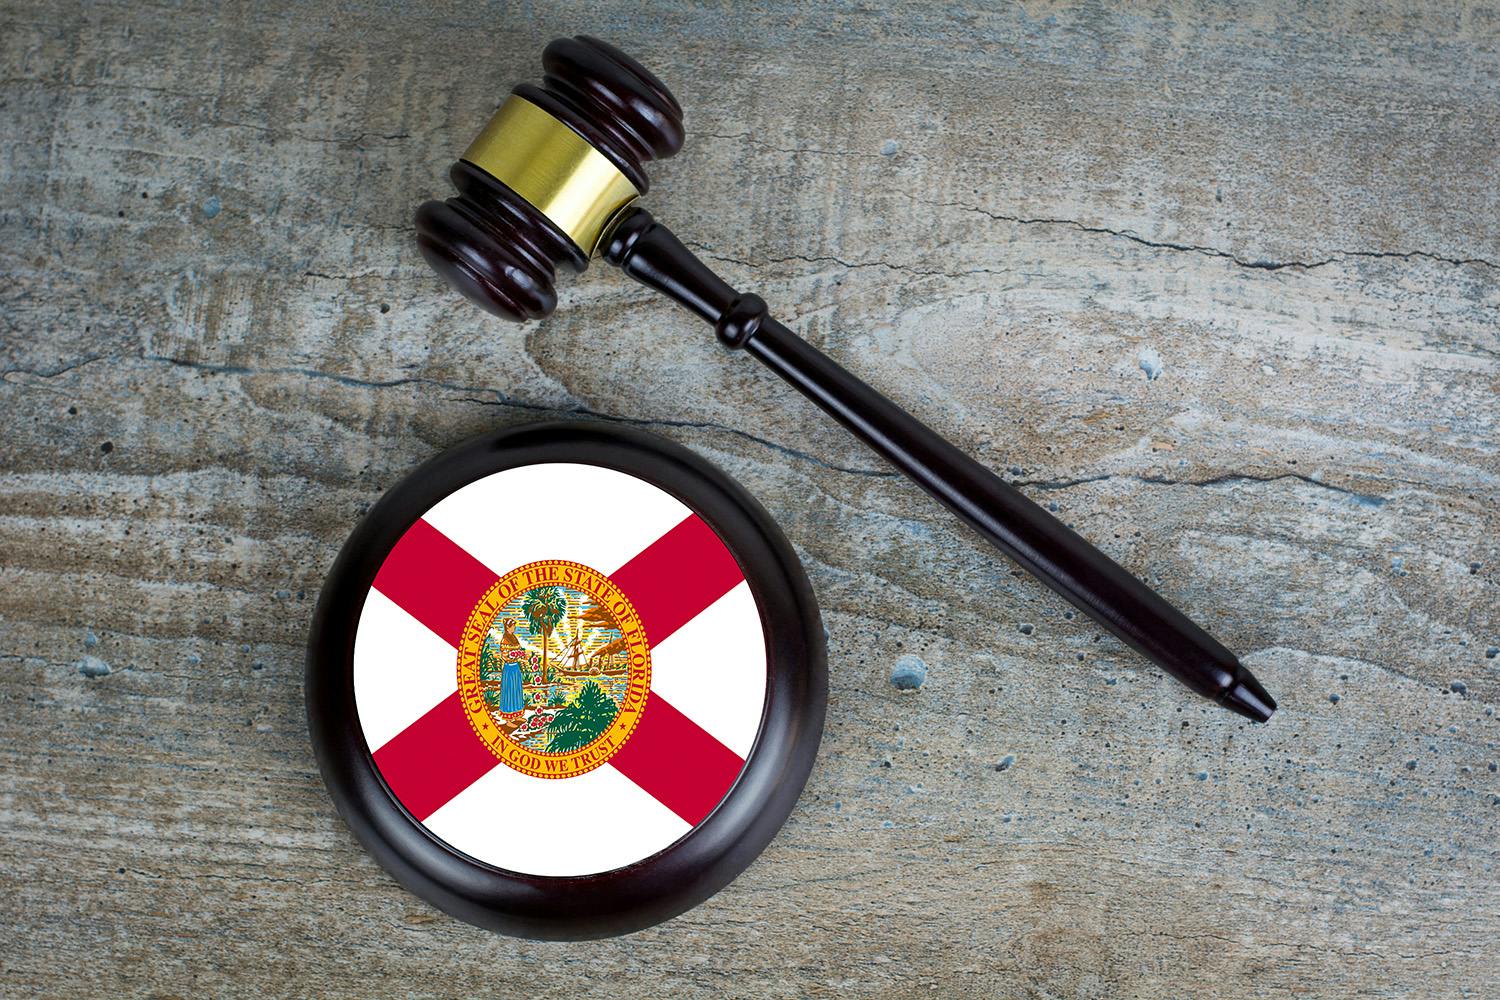 Legal gavel with pad showing Florida state flag